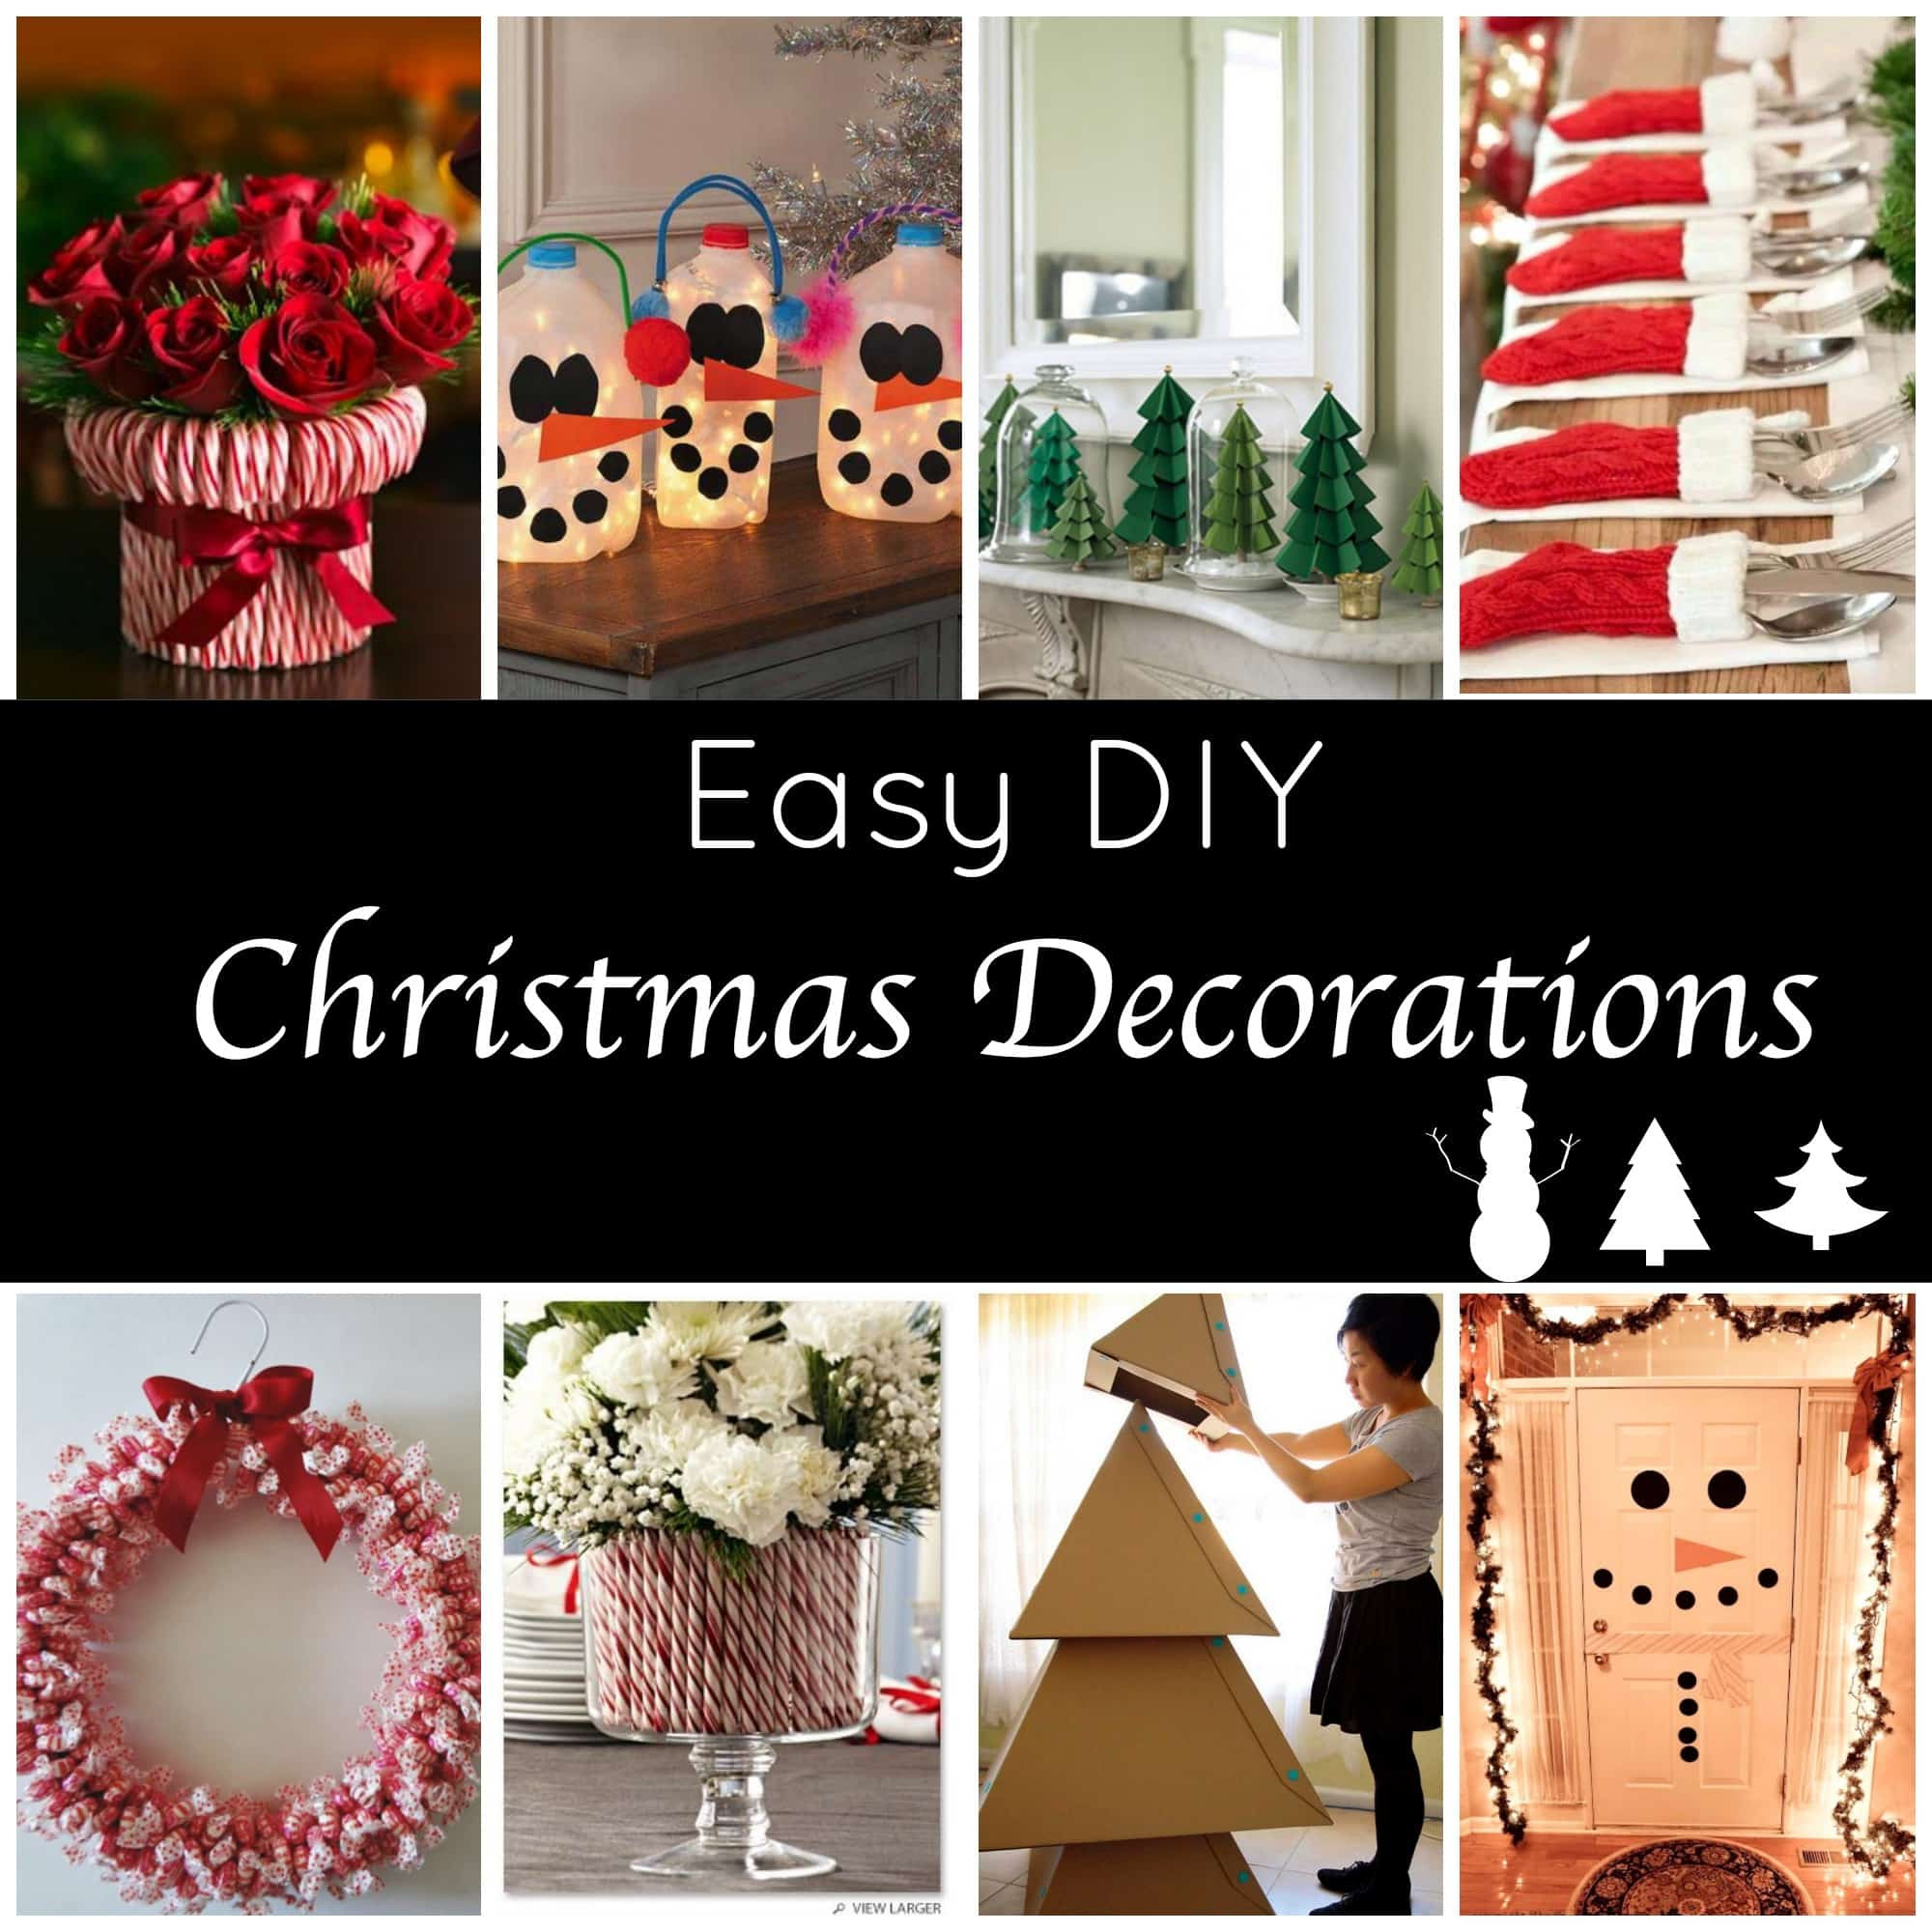 DIY Decorations For Christmas
 Cute & Easy Holiday Decorations Page 2 of 2 Princess